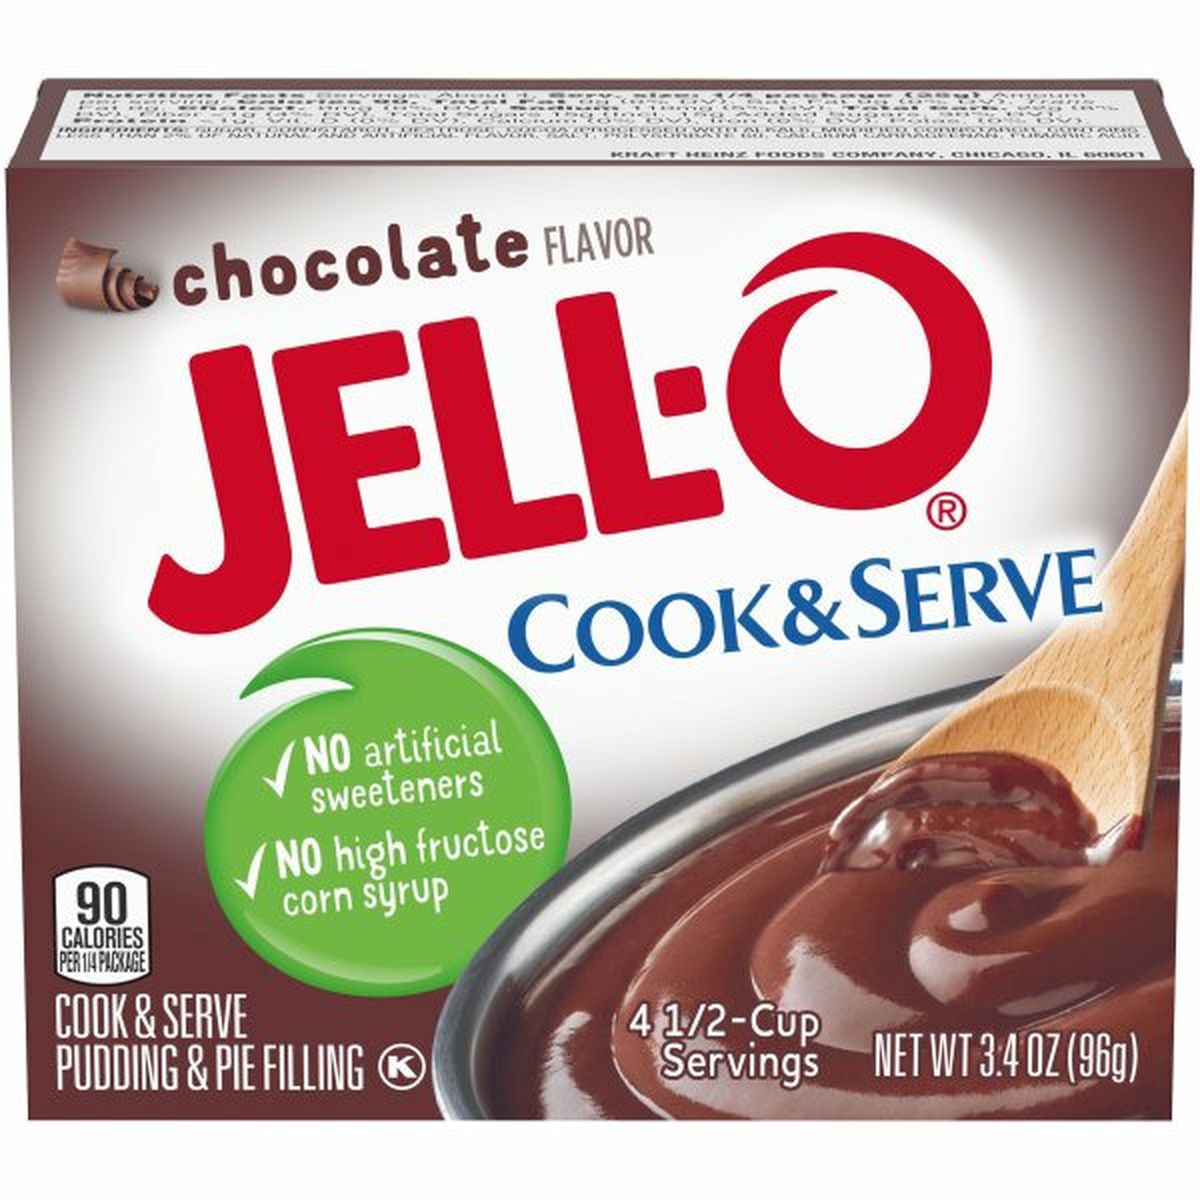 Calories in Jell-O Cook & Serve Chocolate Pudding & Pie Filling